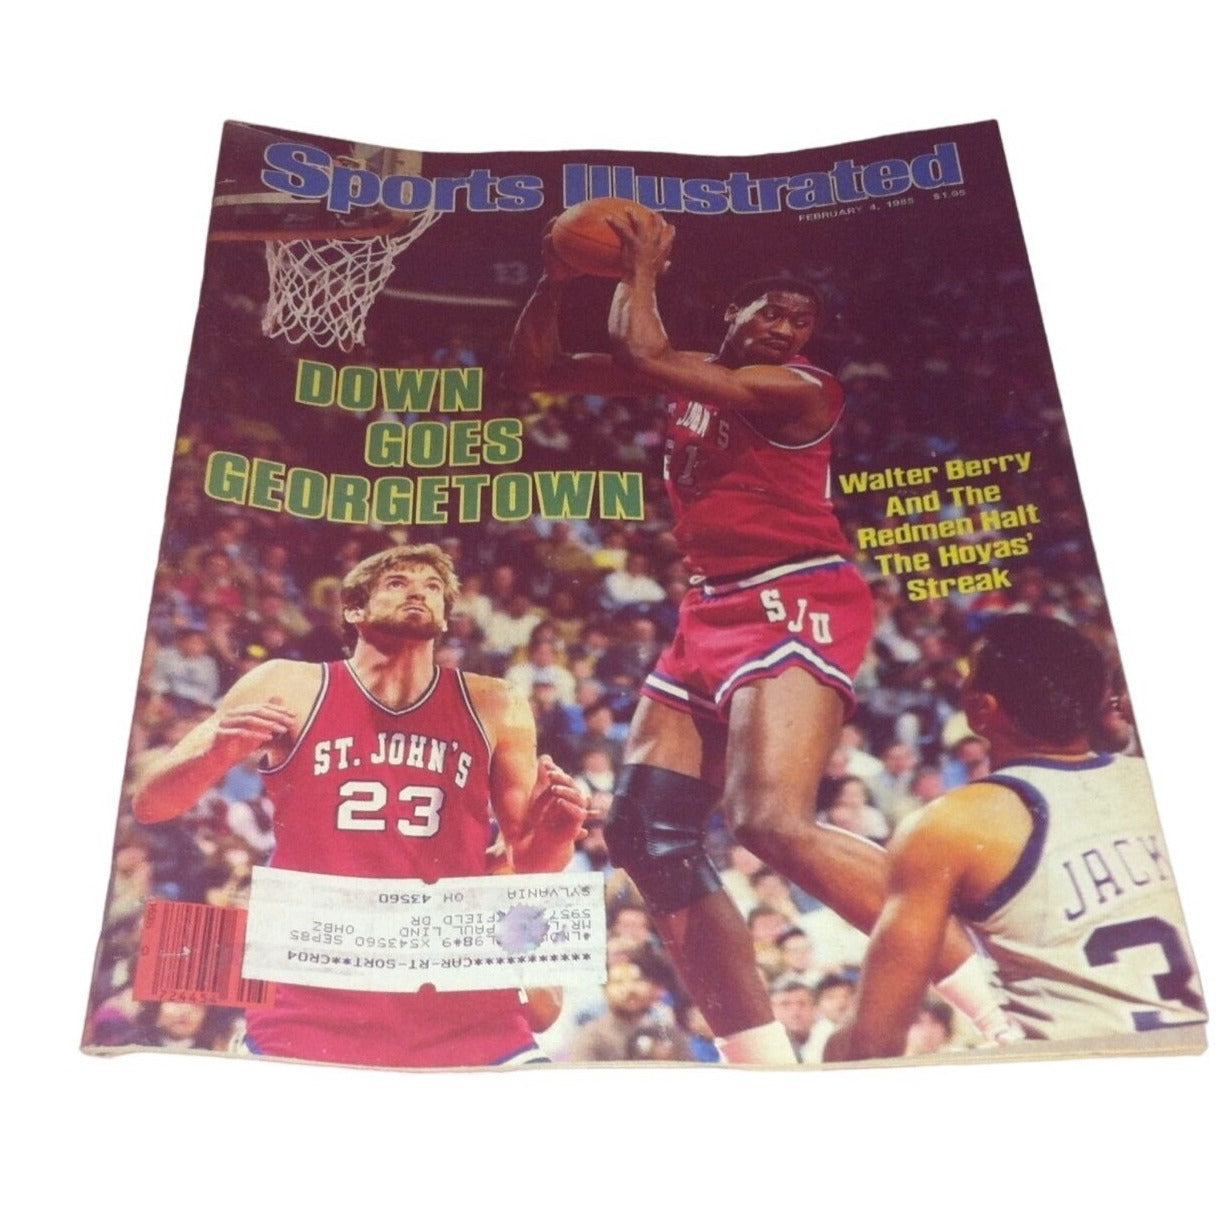 Vintage Sports Illustrated Magazine February 4, 1985 Down Goes Georgetown